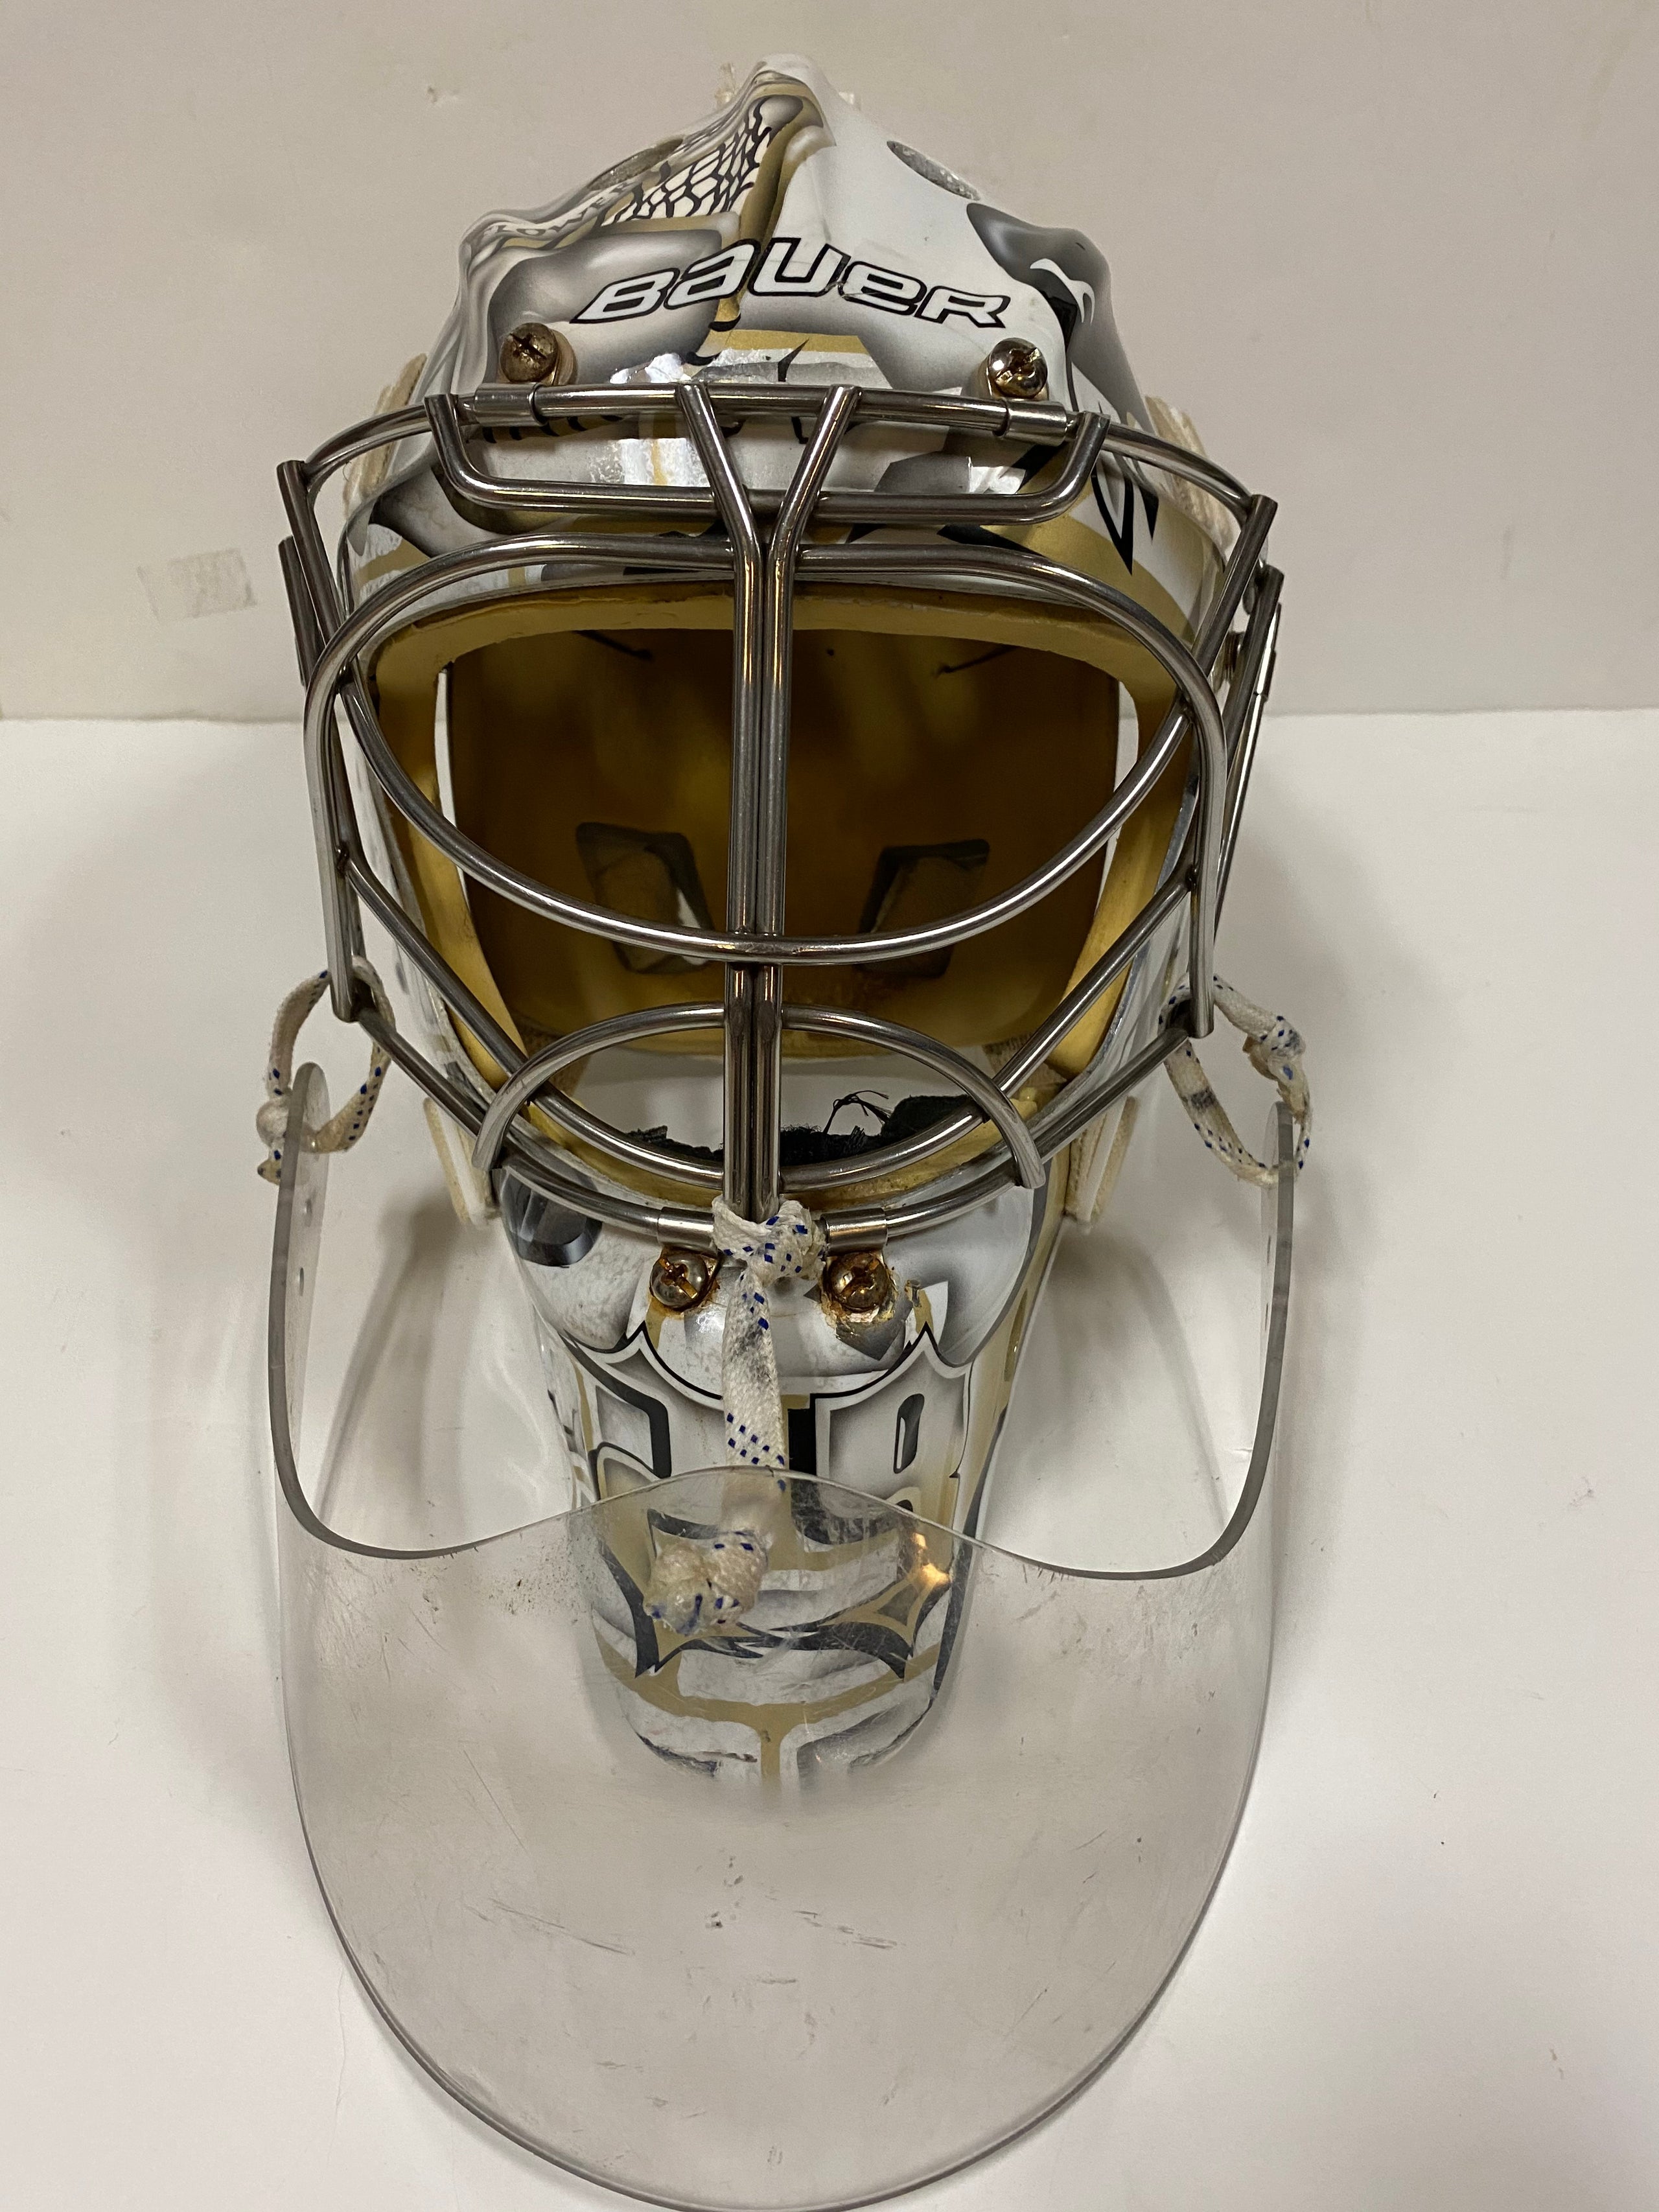 Pittsburgh Penguins are under fire for photoshopping masks onto